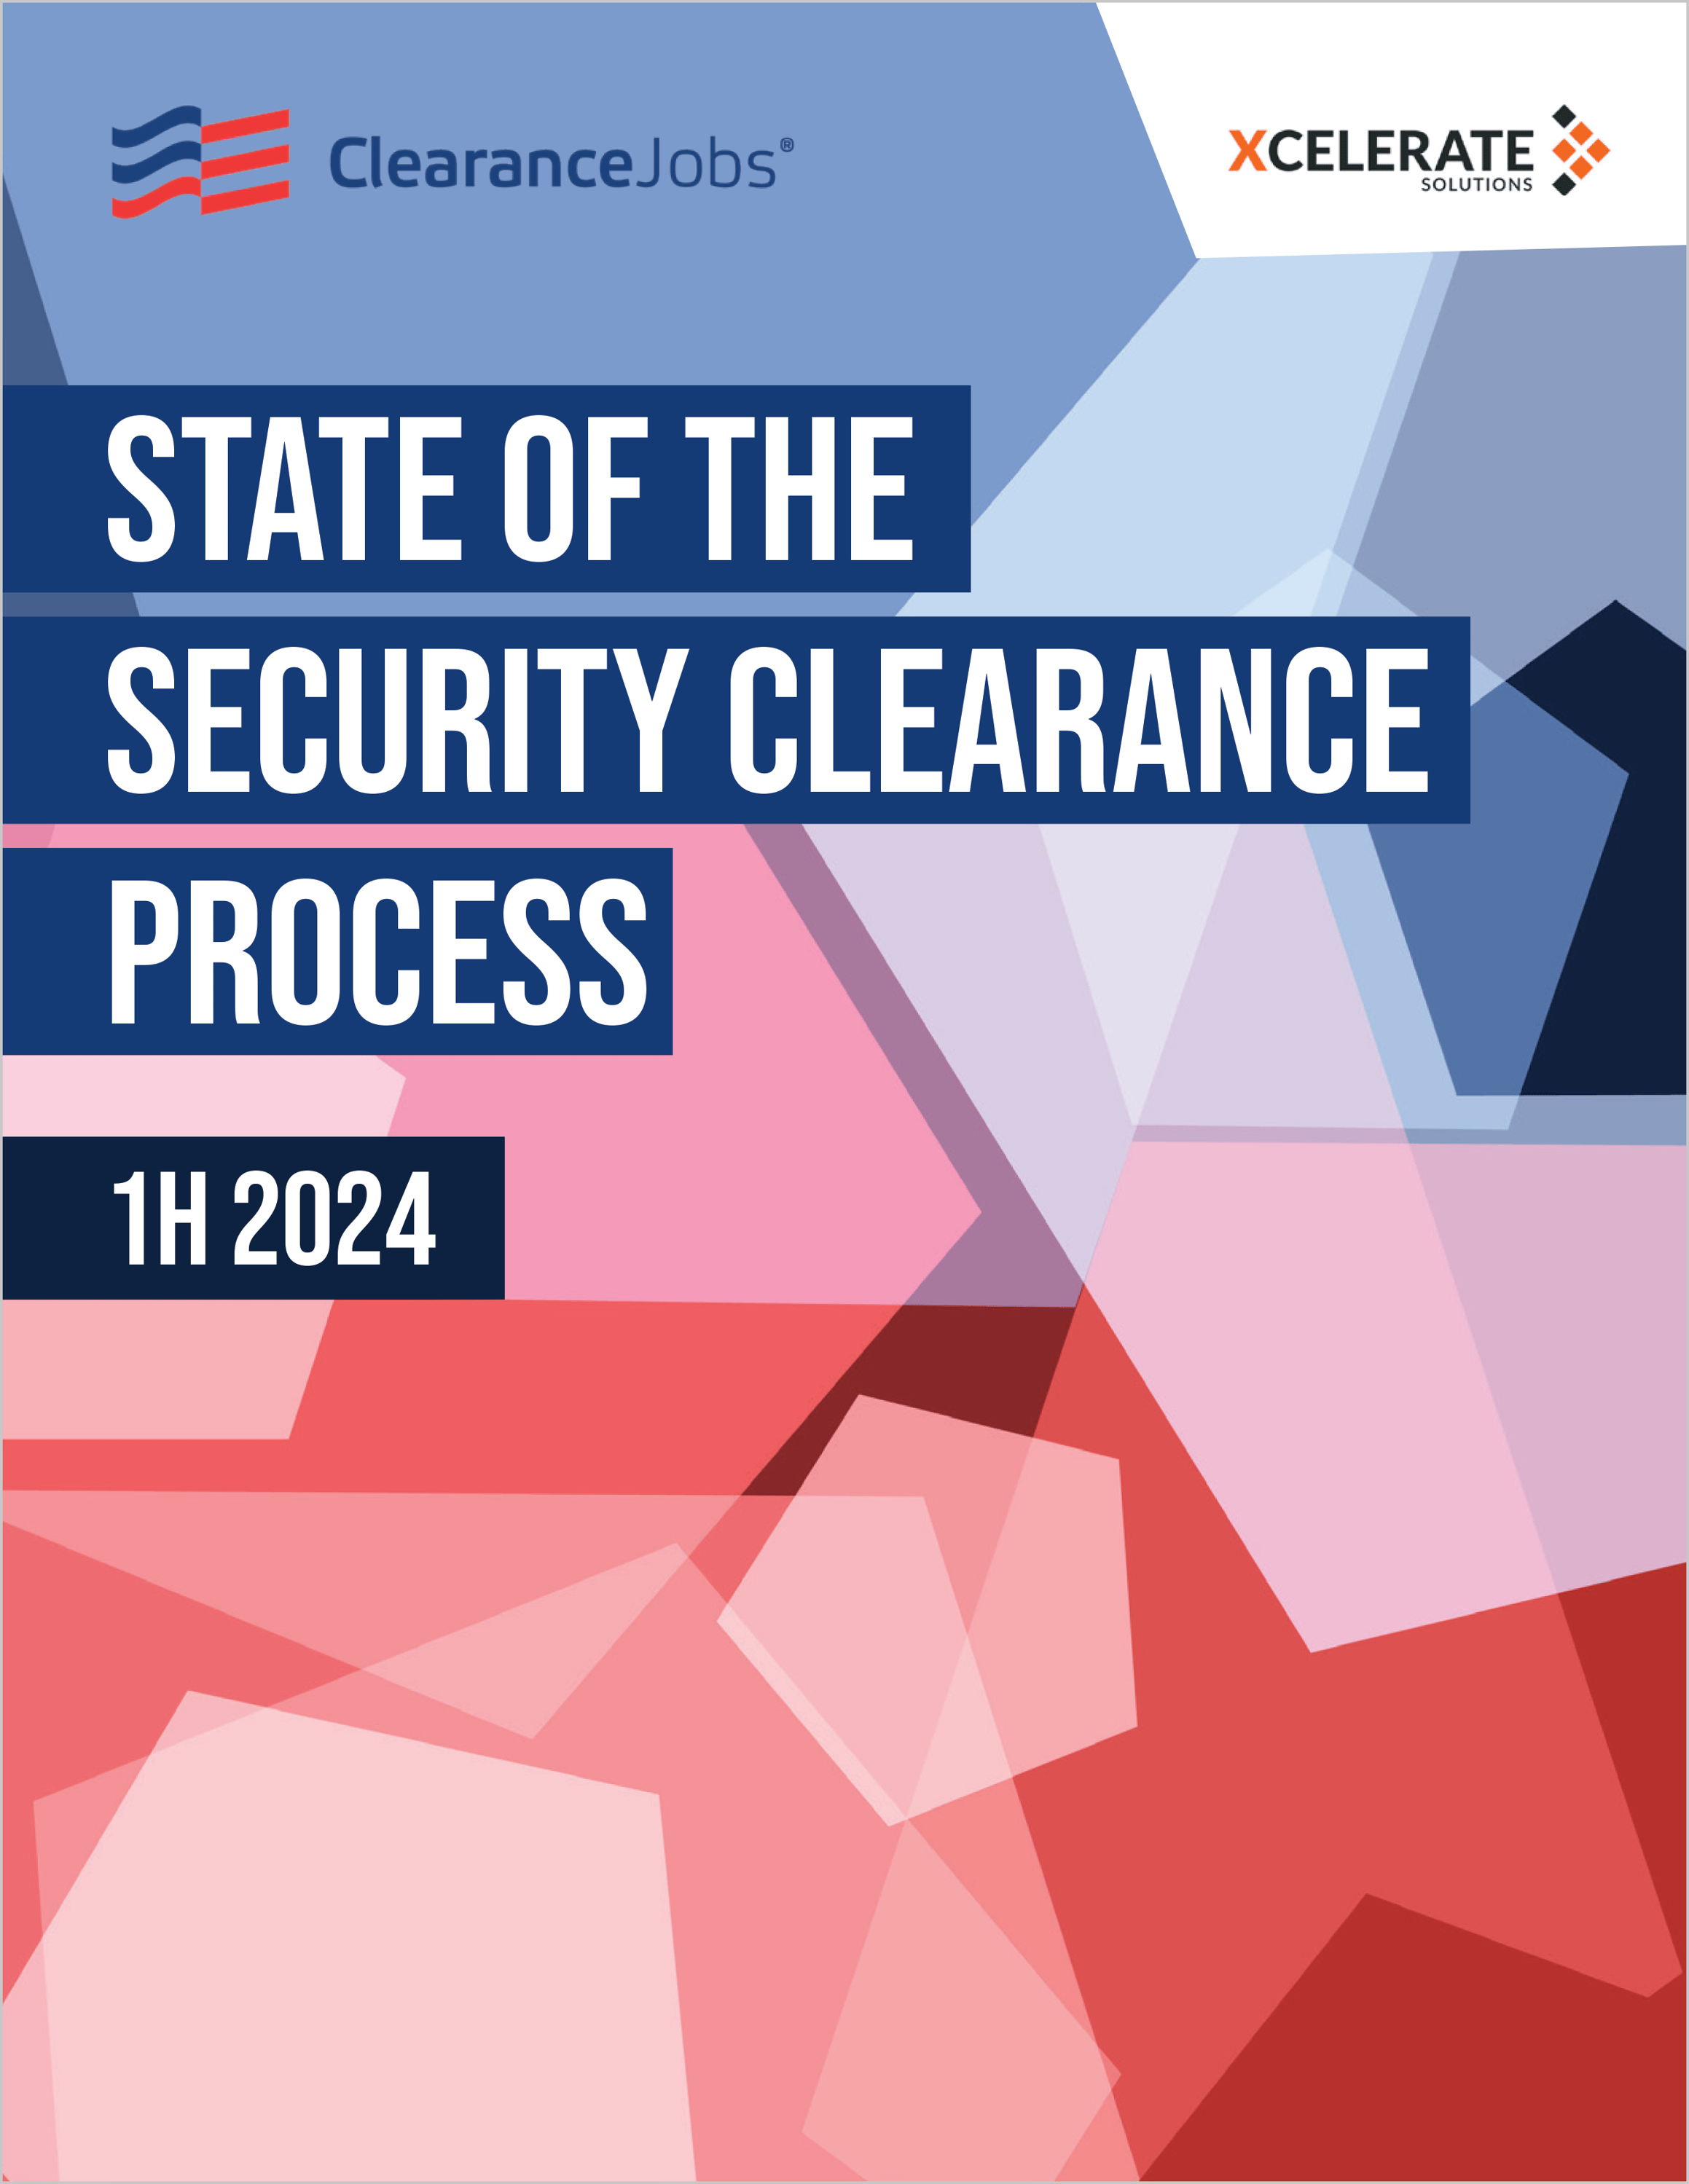 State of the Security Clearance Process 1H 2024